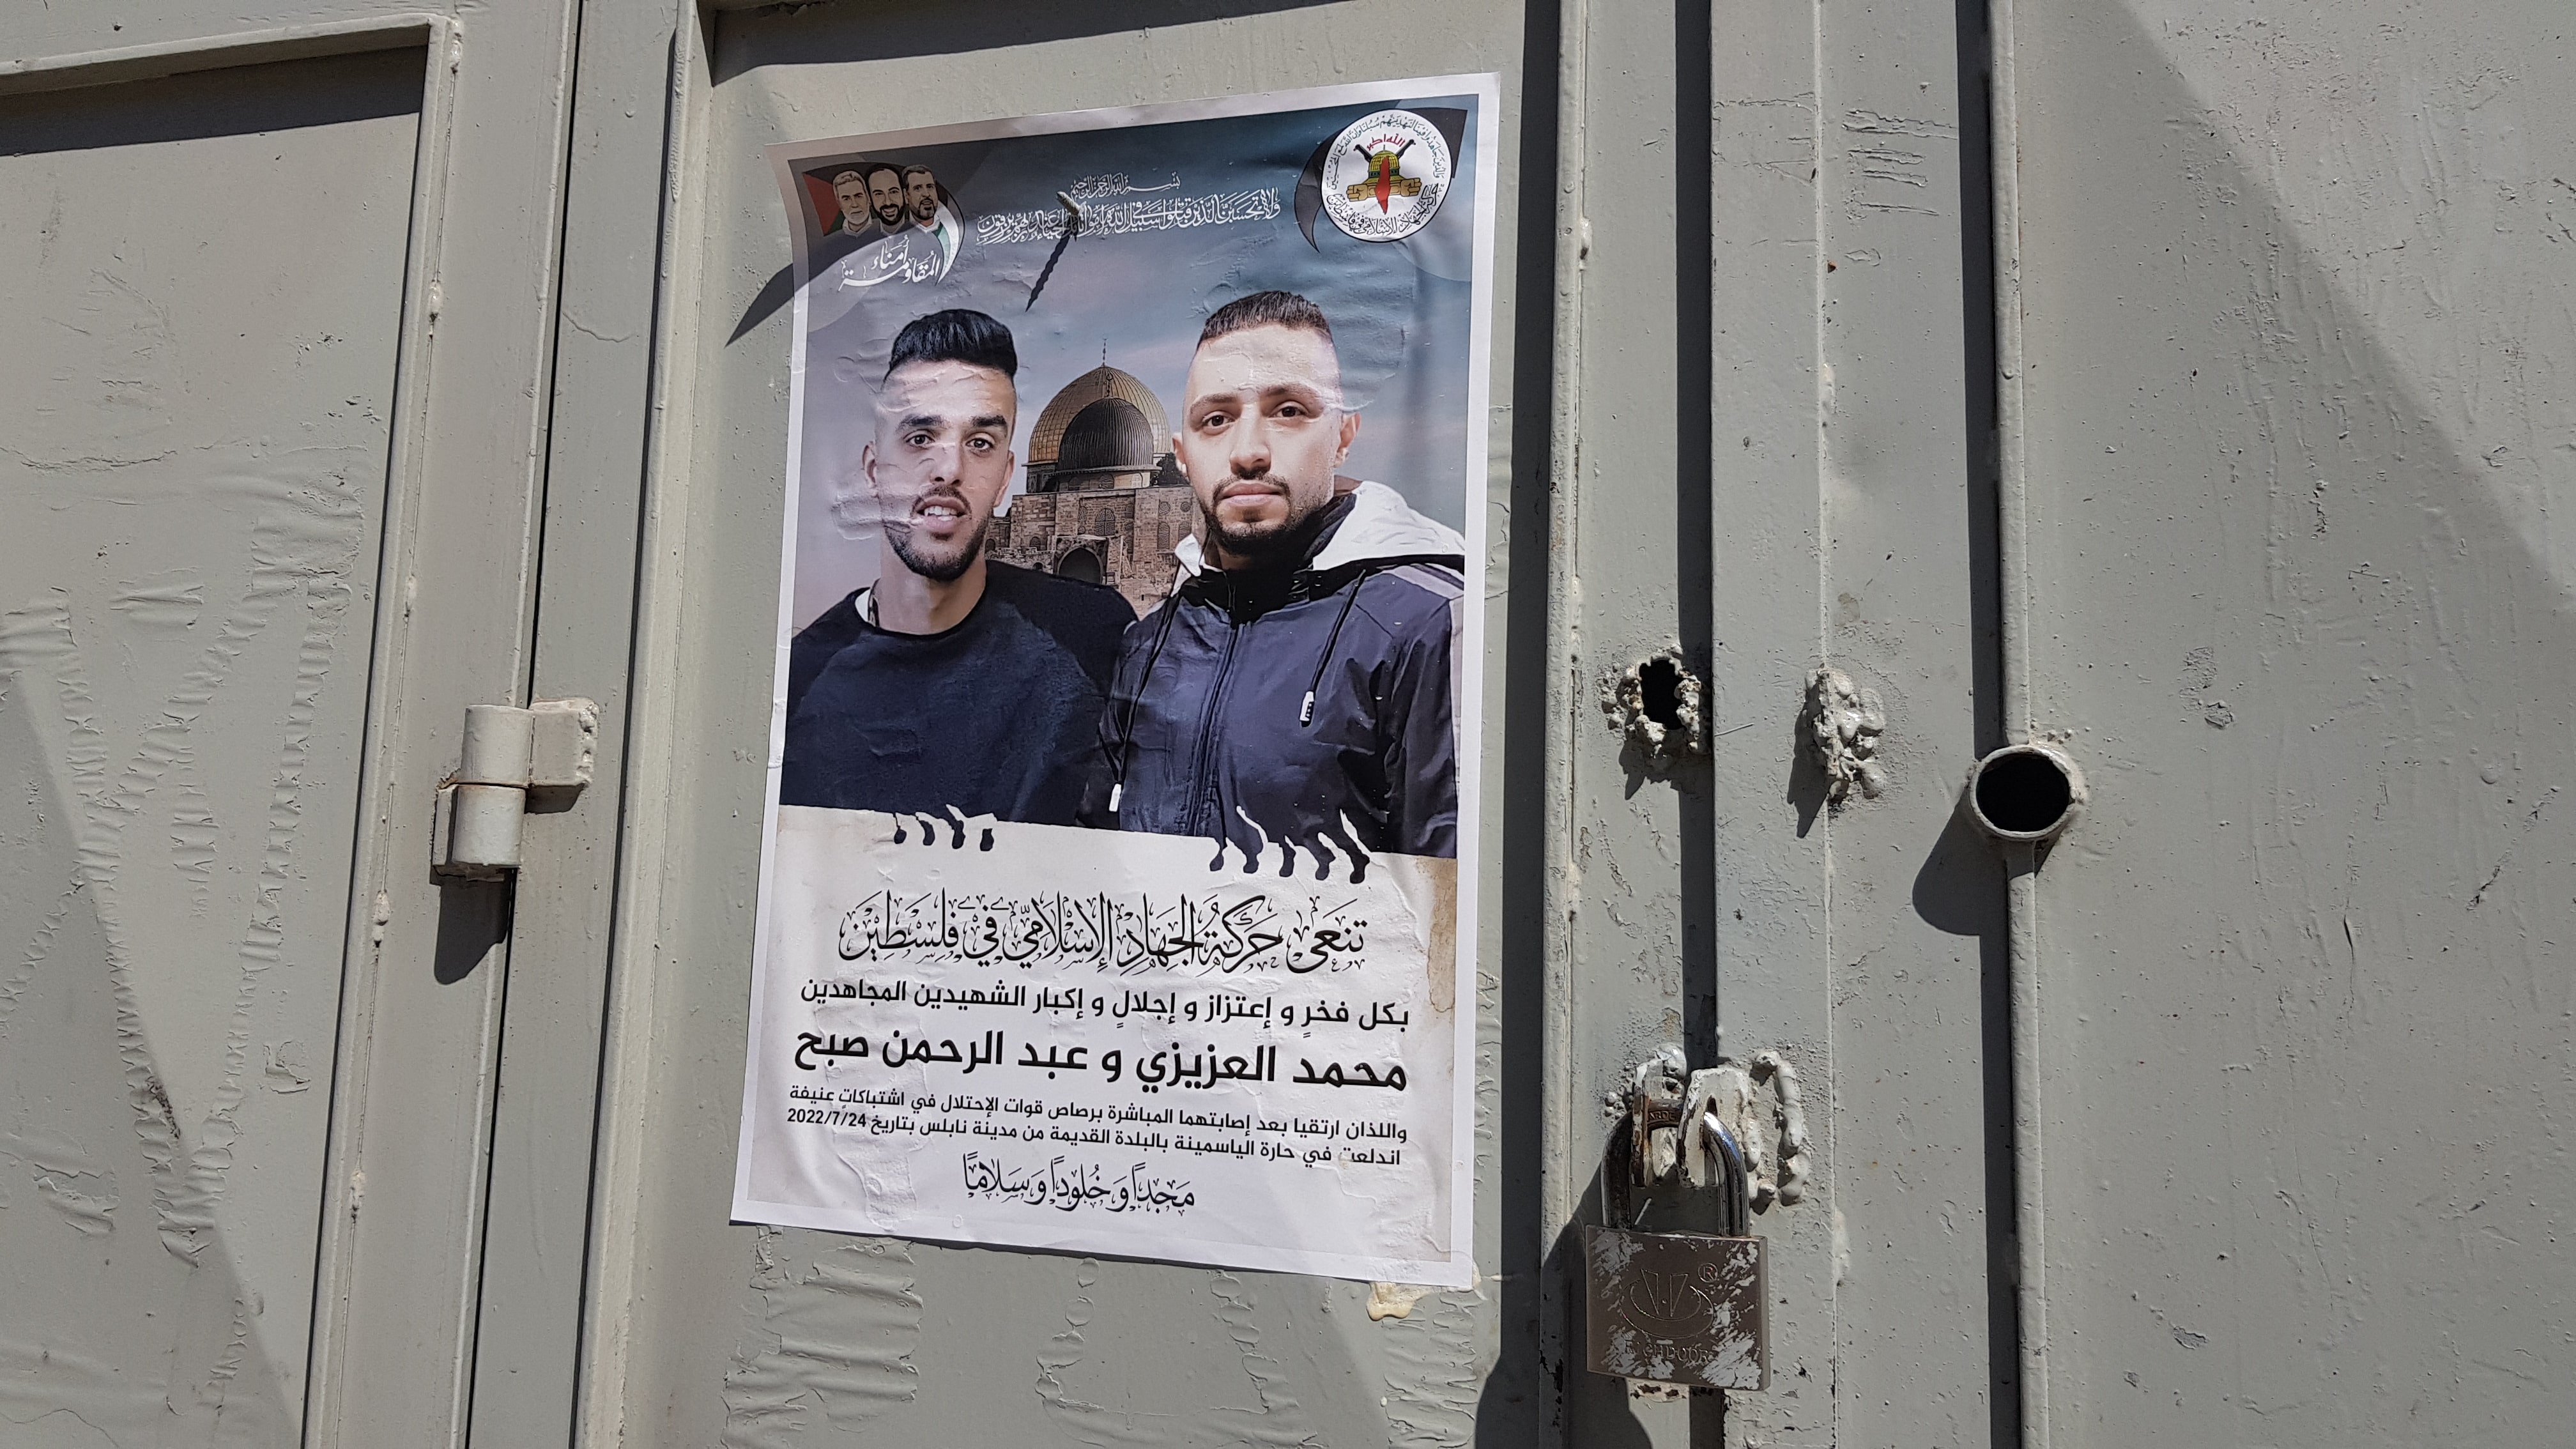 Poster of Abdul Rahman Sobh (L) and Muhammad Azizi (R), who were killed by the Israeli army on 24 July 2022, hung up in Nablus in the occupied West Bank. (MEE/Aziza Nofal)